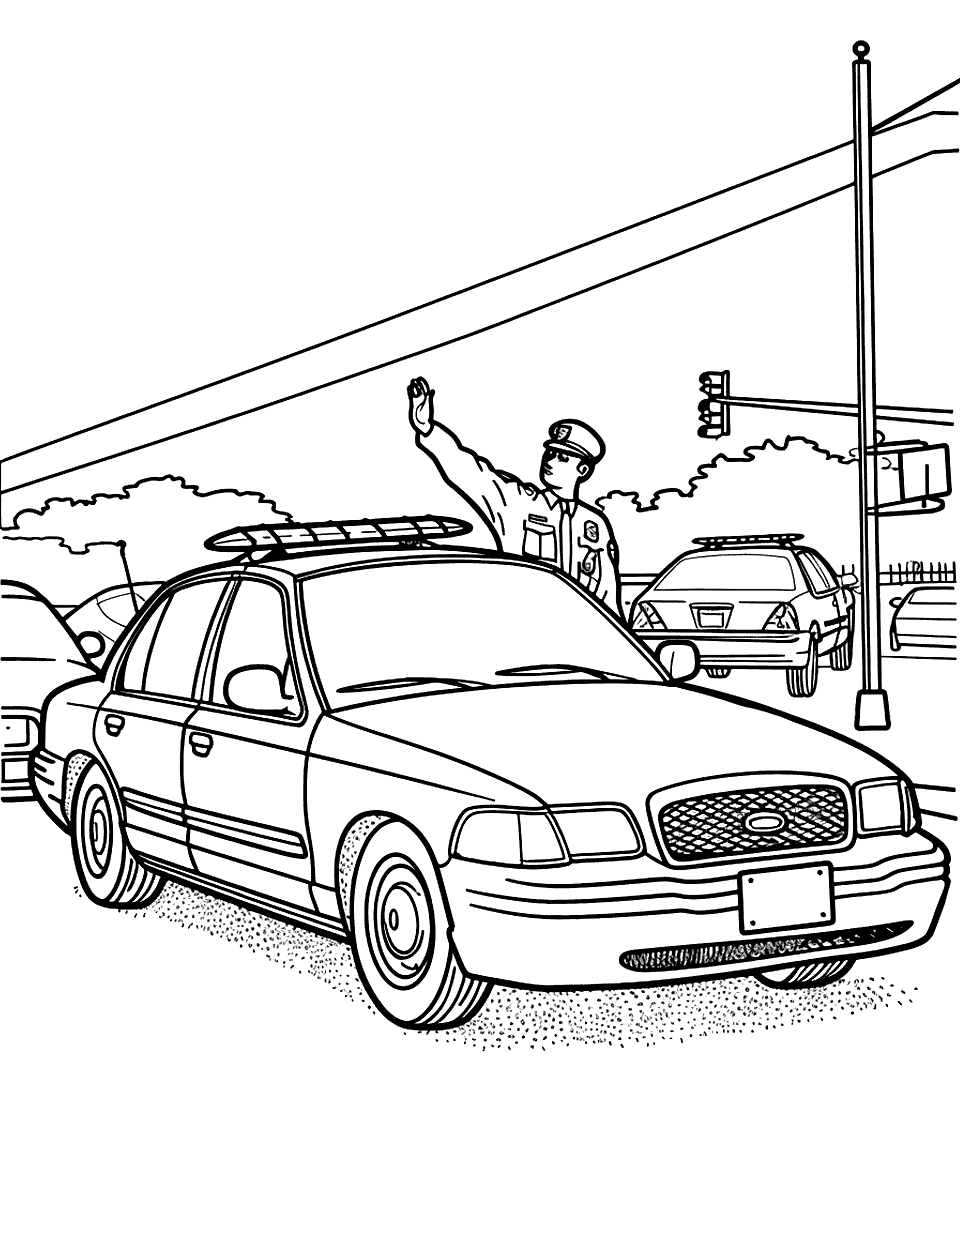 Officer Directing Evacuation Police Car Coloring Page - A police officer directing traffic during an evacuation, with his car nearby.